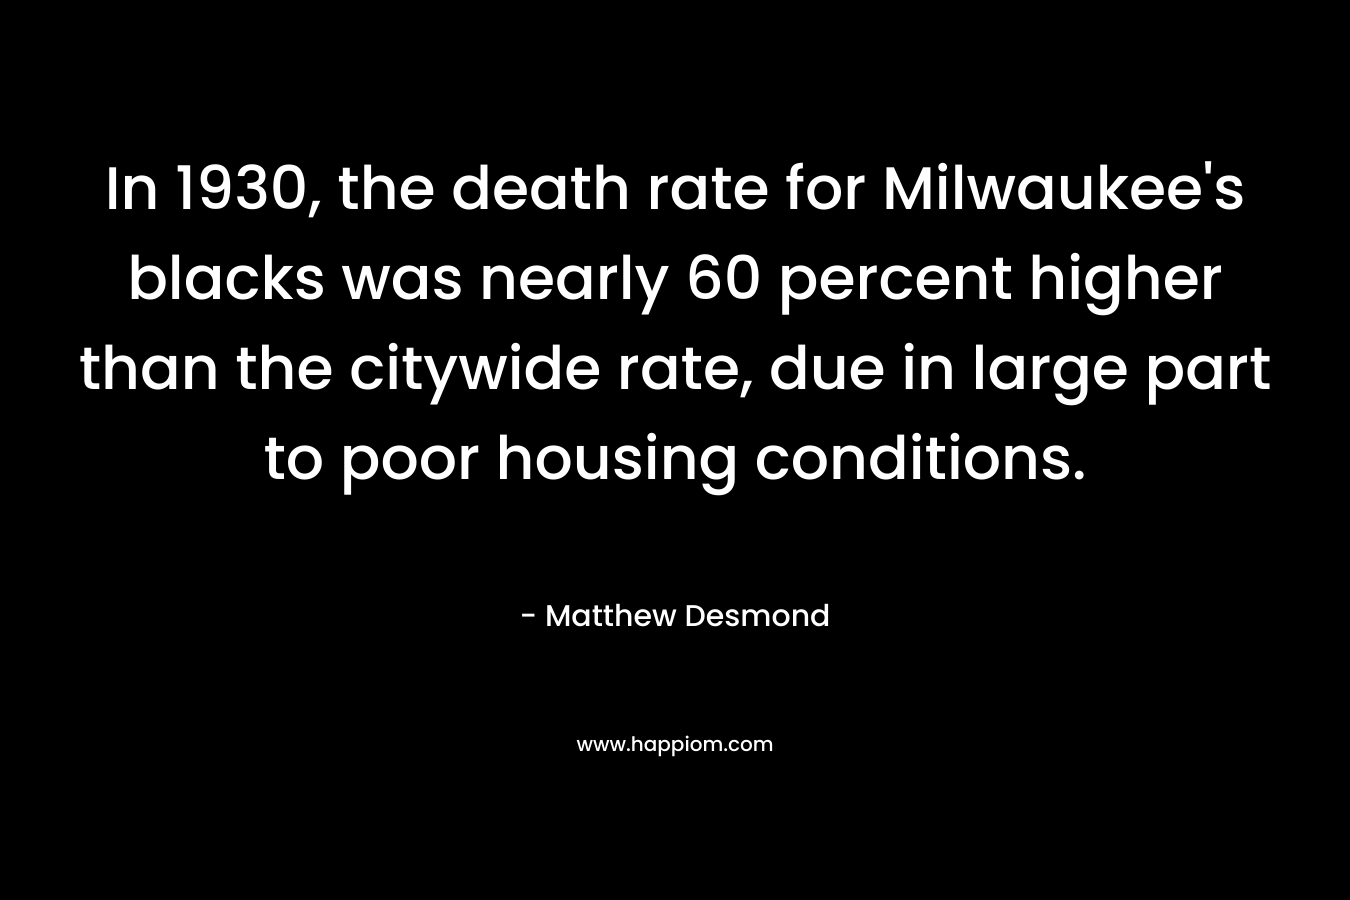 In 1930, the death rate for Milwaukee's blacks was nearly 60 percent higher than the citywide rate, due in large part to poor housing conditions.